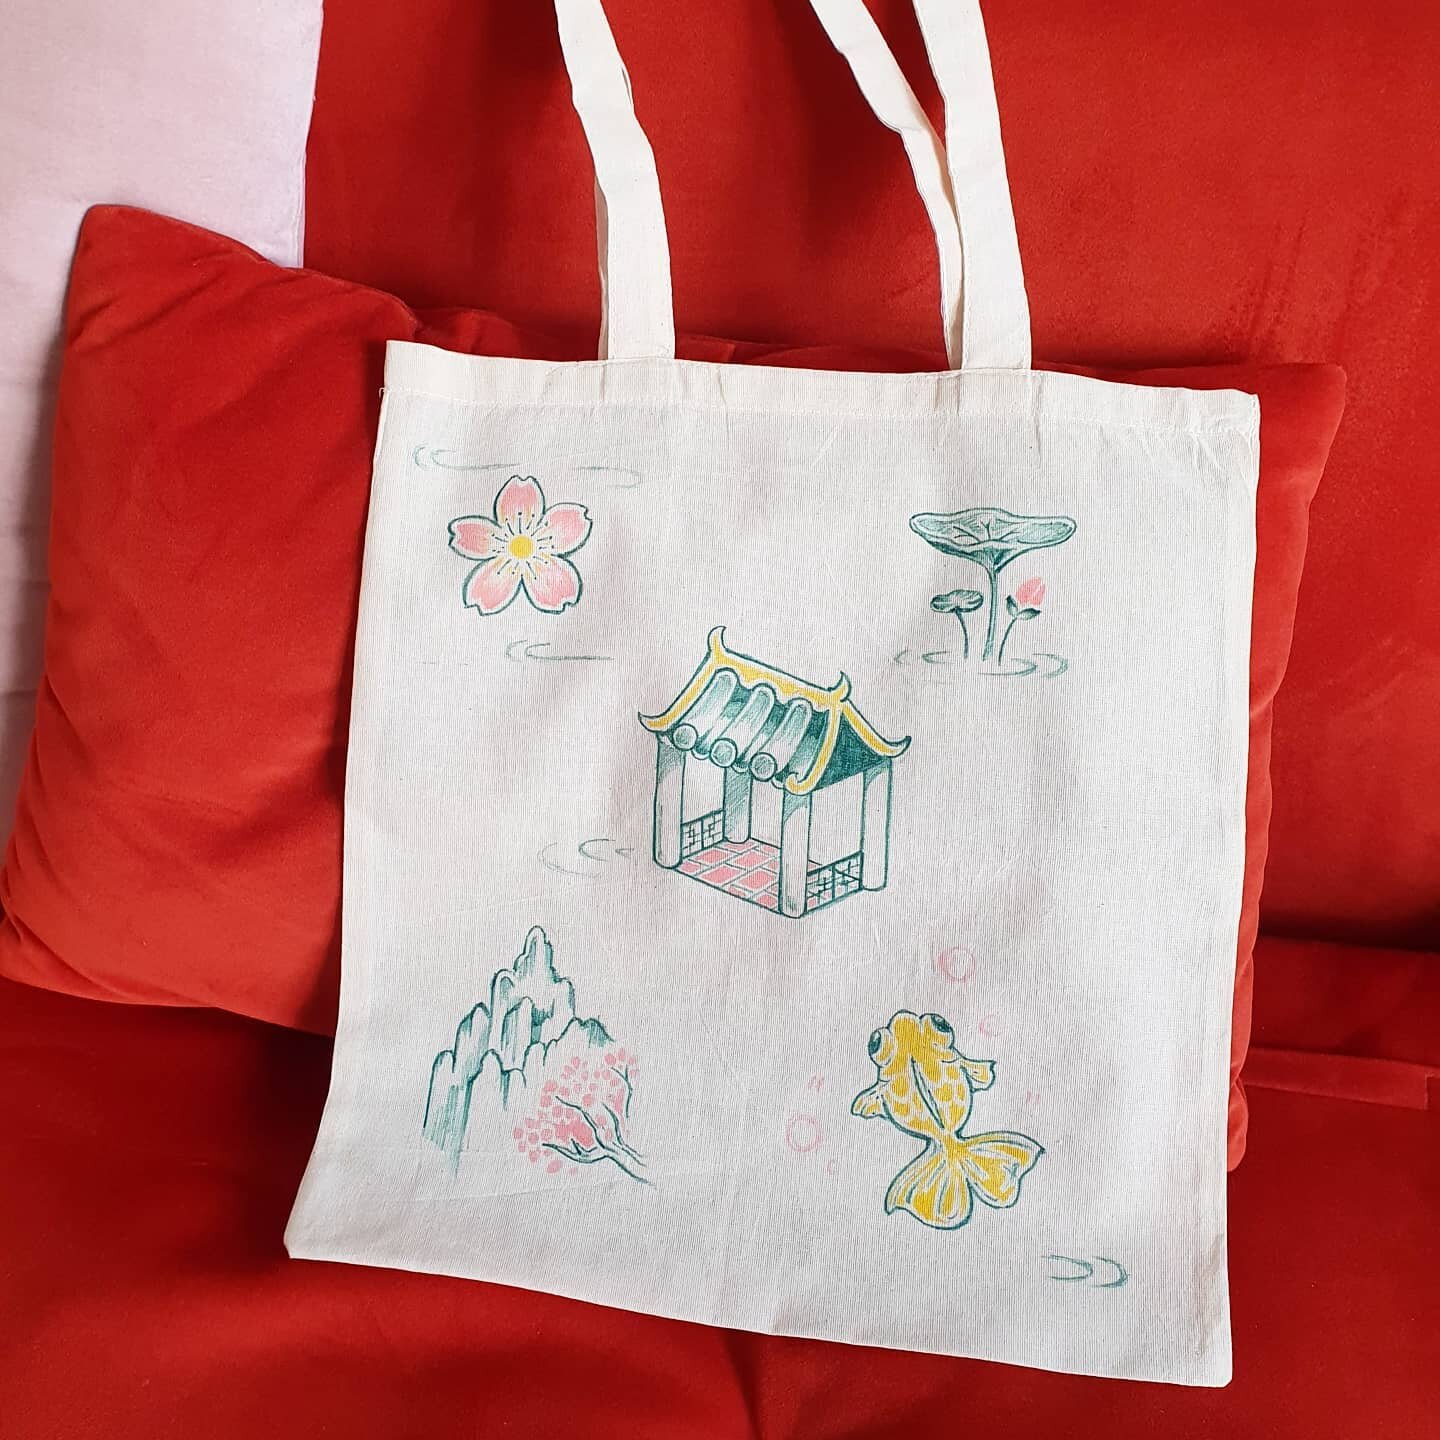 The last sneak peek of these hand painted tote bags before the fair. 🌸🍃
There will only be a few in very different styles, lets see how they do! 
If all goes well, I might do some from time to time and pop them online! 
.
.
.
#illustration #totebag